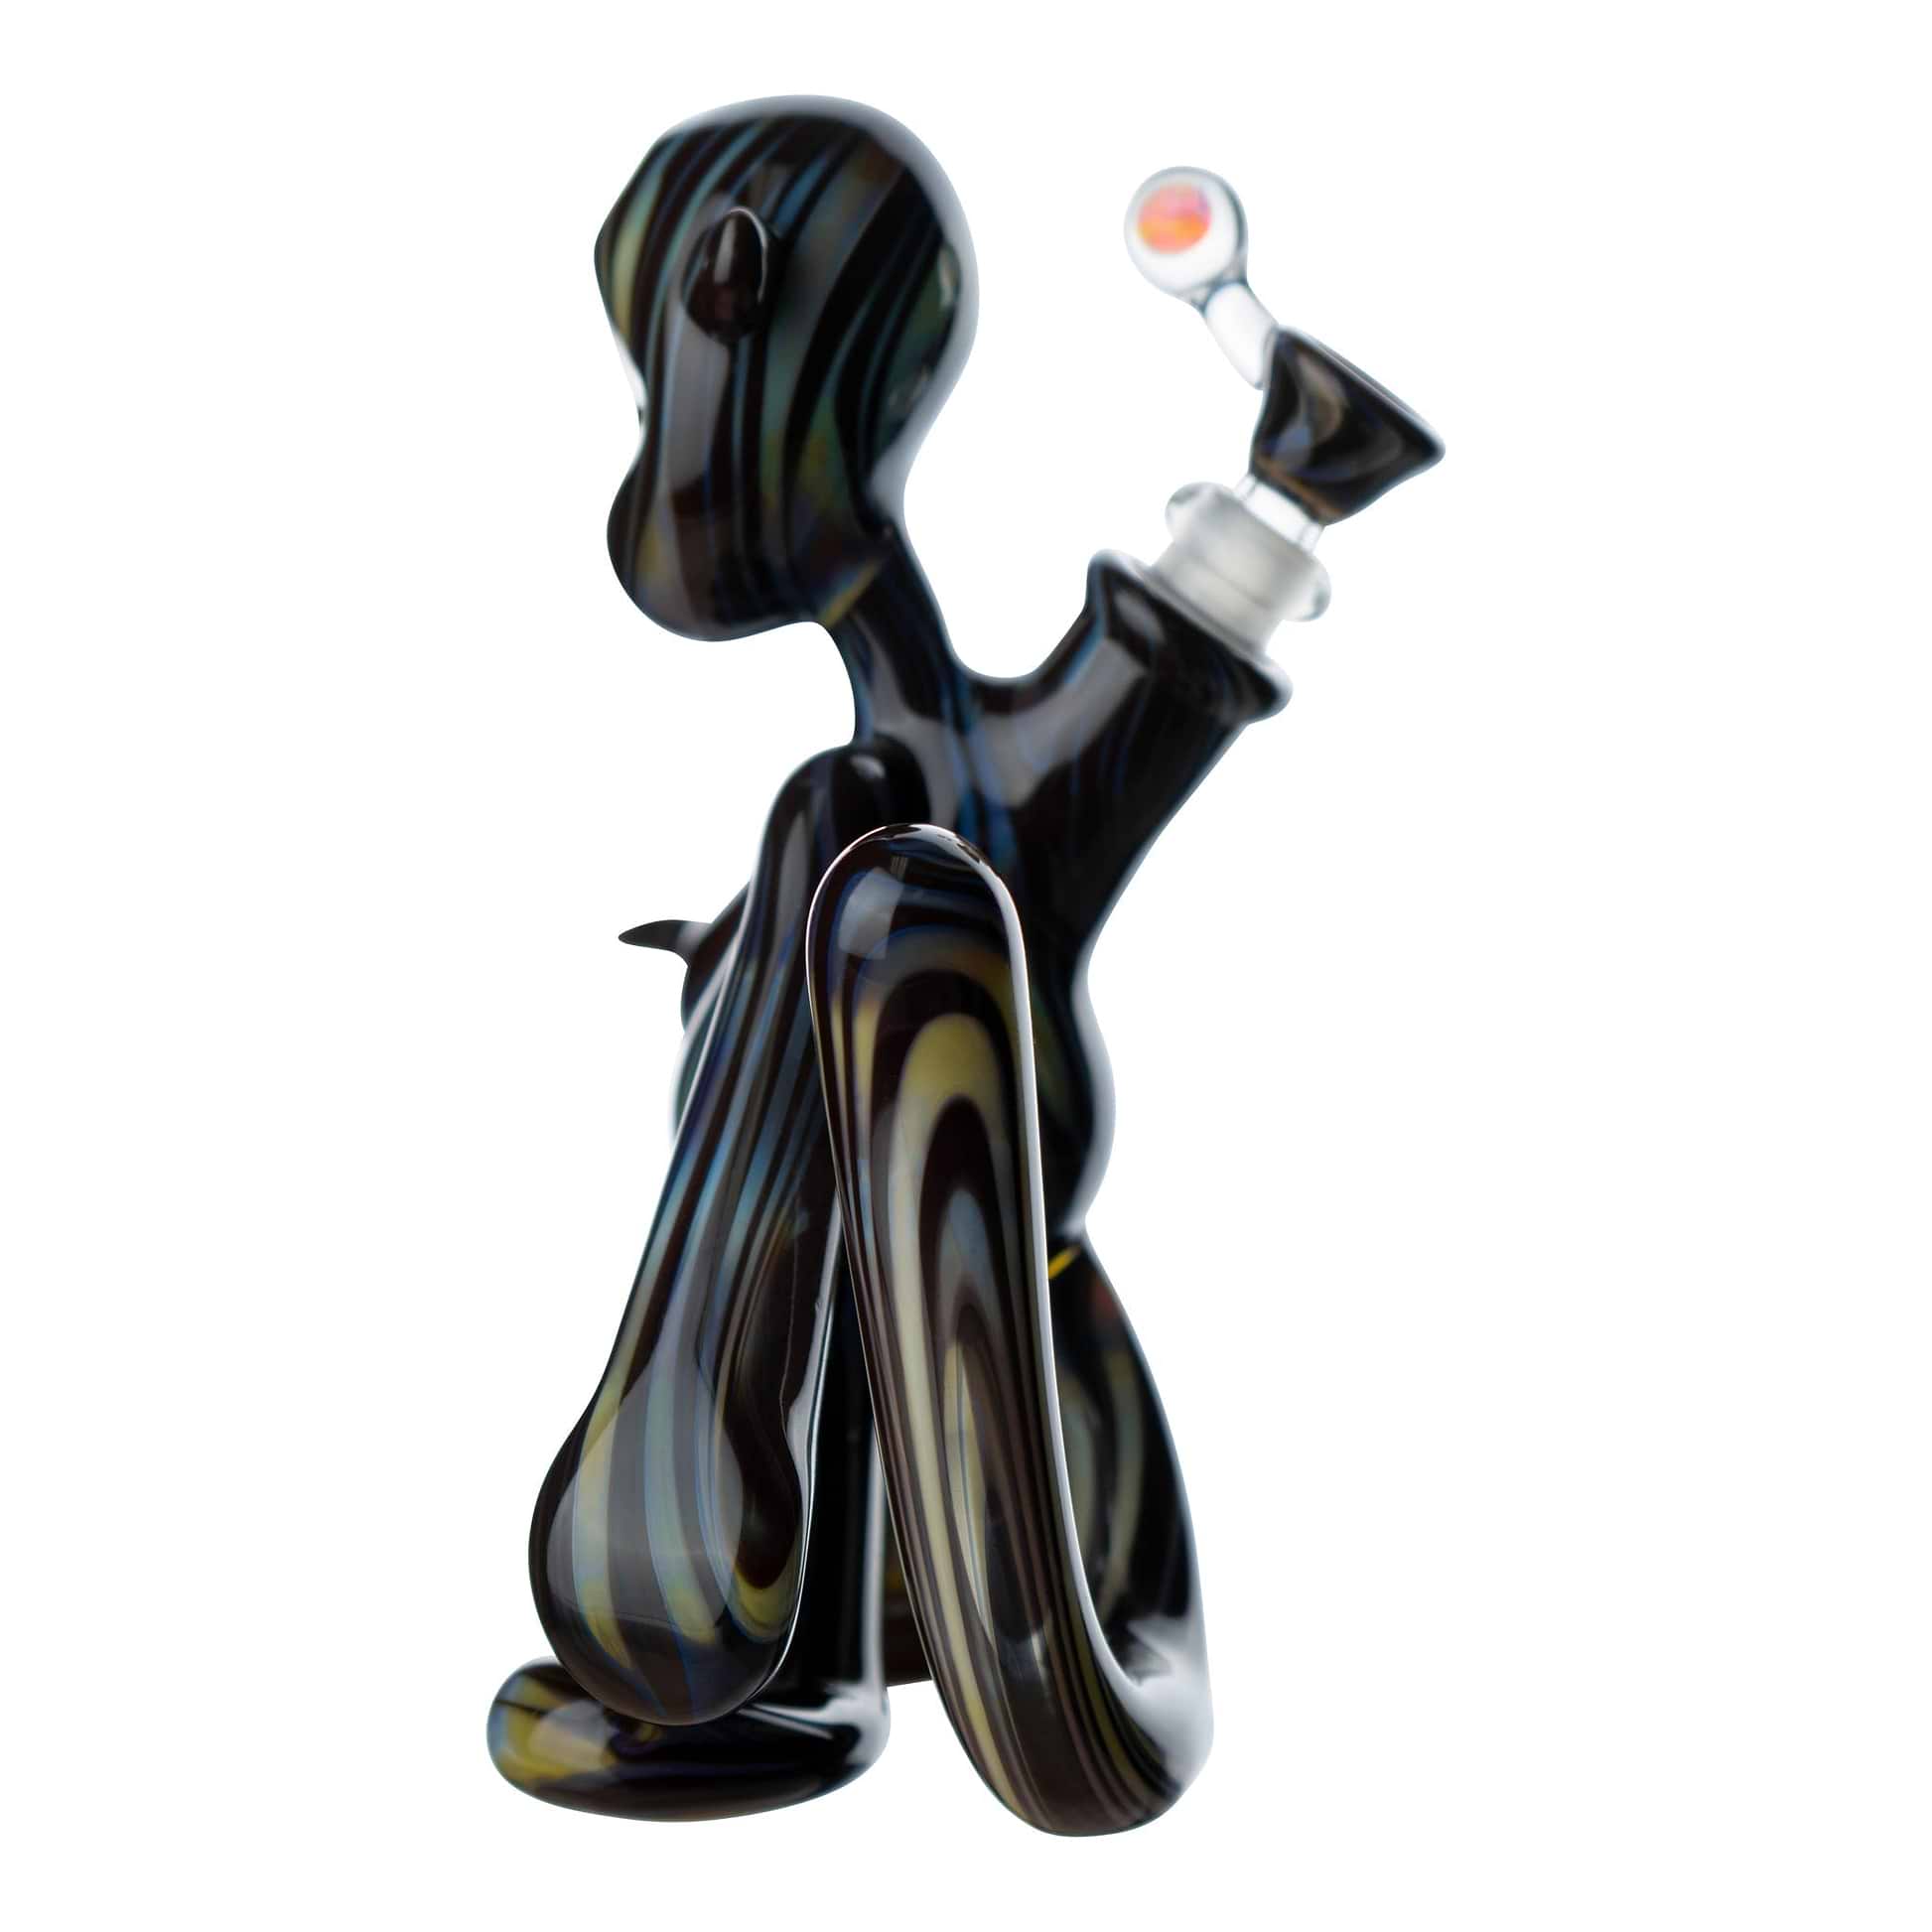 Matchstick Man by Hurley Glass